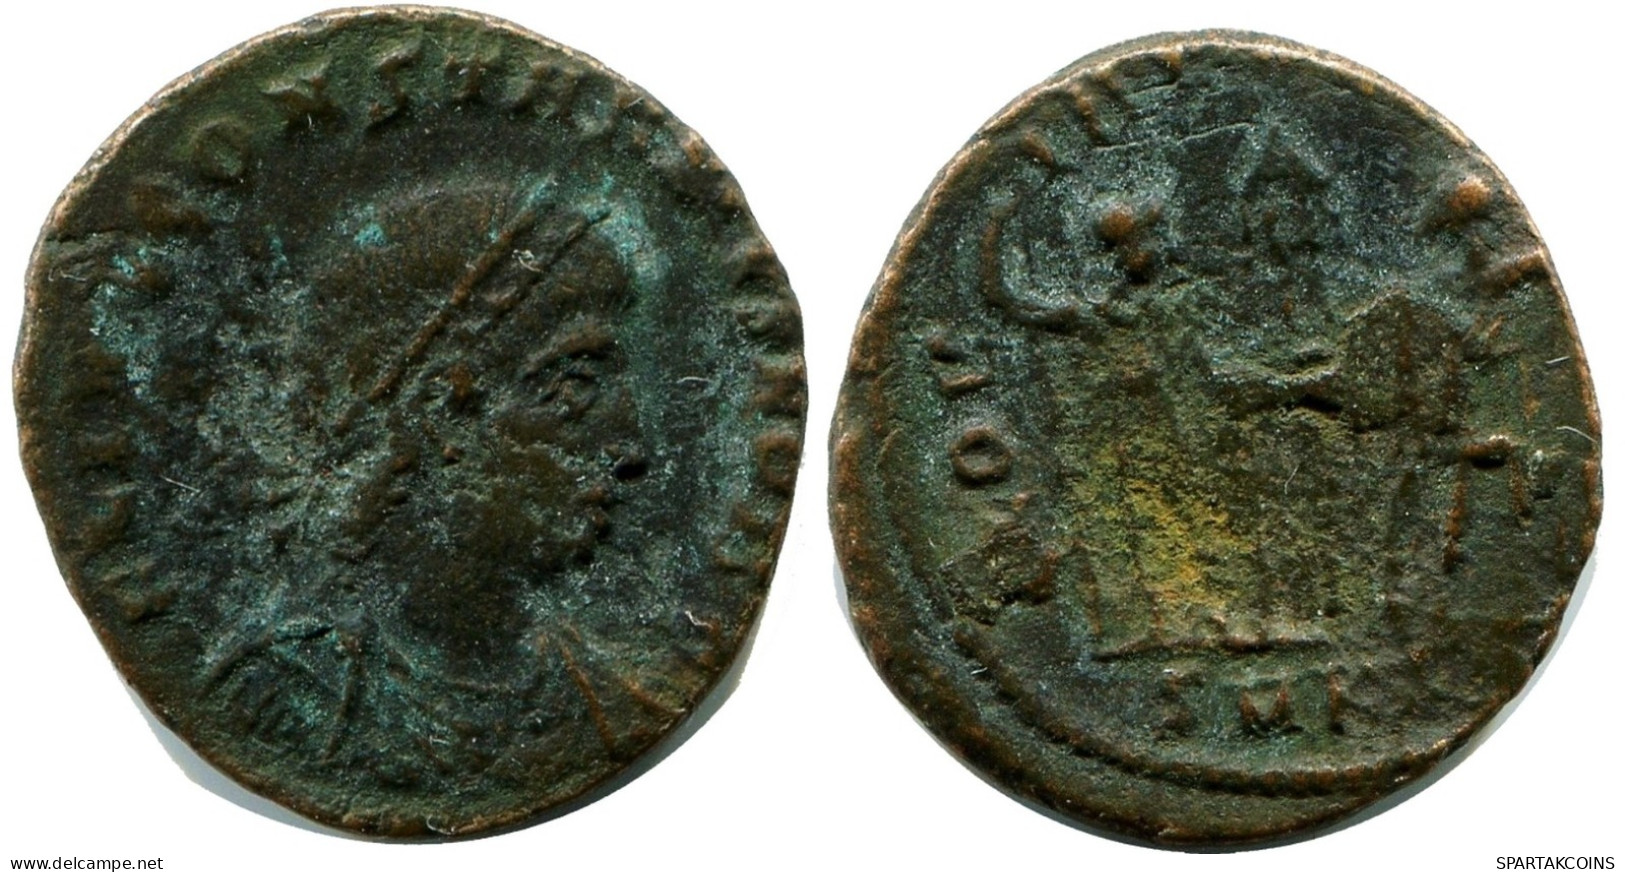 CONSTANS MINTED IN CYZICUS FROM THE ROYAL ONTARIO MUSEUM #ANC11609.14.F.A - El Impero Christiano (307 / 363)